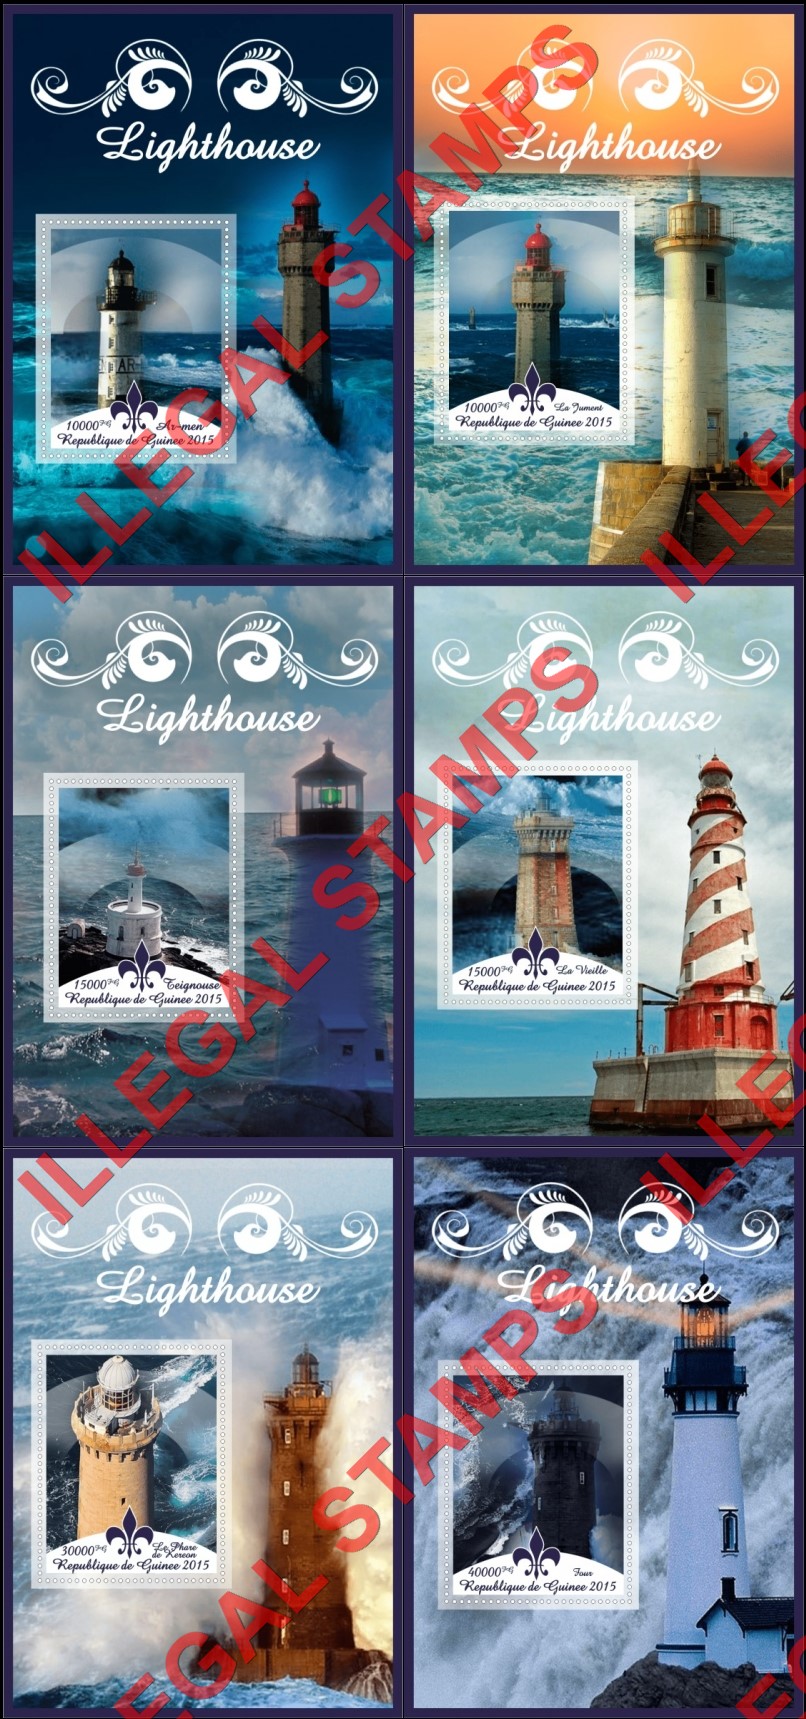 Guinea Republic 2015 Lighthouses Illegal Stamp Souvenir Sheets of 1